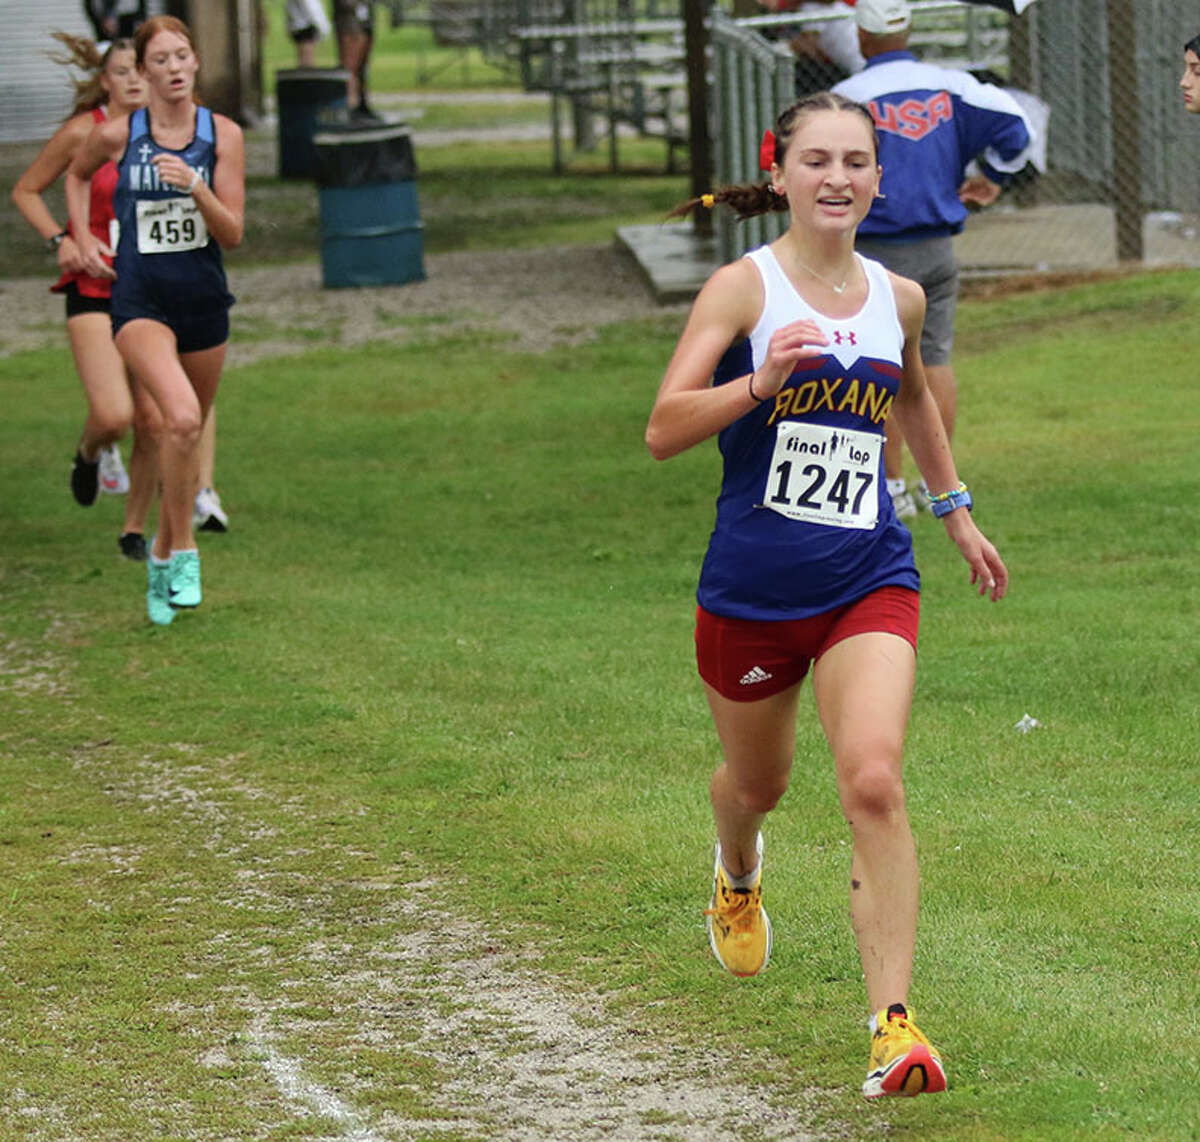 Roxana senior Gabrielle Woodruff (right) pushes for the finish at the Granite City Invite on Sept. 3 in Granite. Woodruff posted a PR while placing 12th at the Freeburg Invite on Saturday in Smithton.